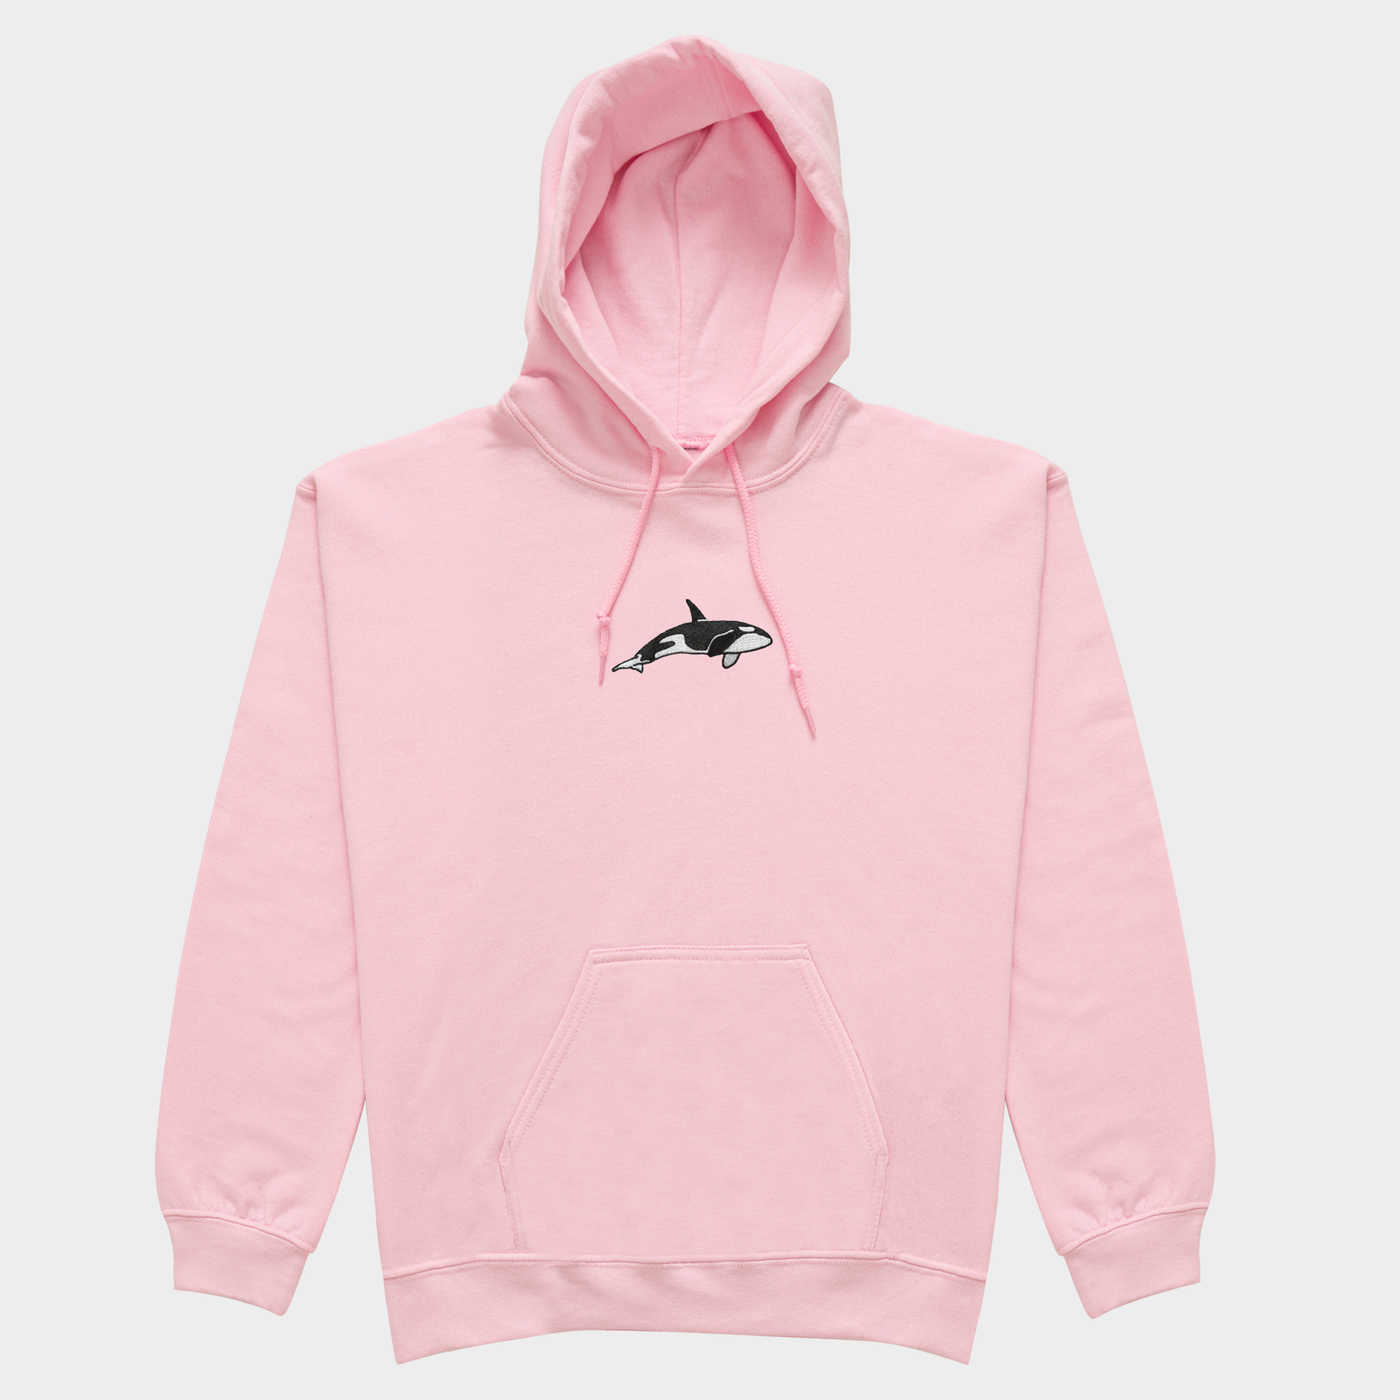 Bobby's Planet Women's Embroidered Orca Hoodie from Seven Seas Fish Animals Collection in Light Pink Color#color_light-pink